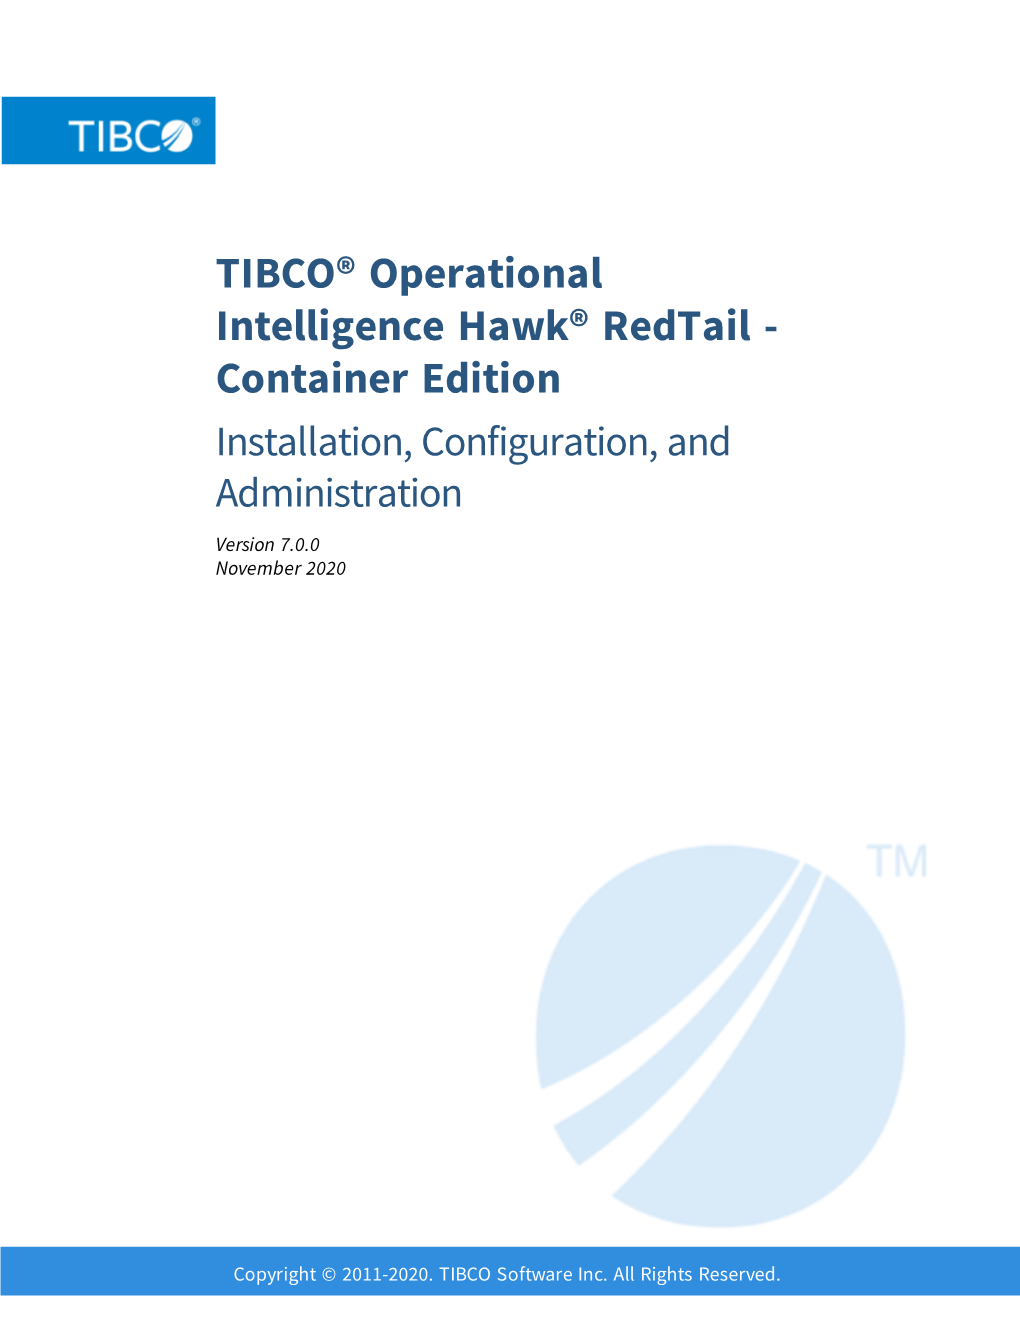 TIBCO® Operational Intelligence Hawk® Redtail - Container Edition Installation, Configuration, and Administration Version 7.0.0 November 2020